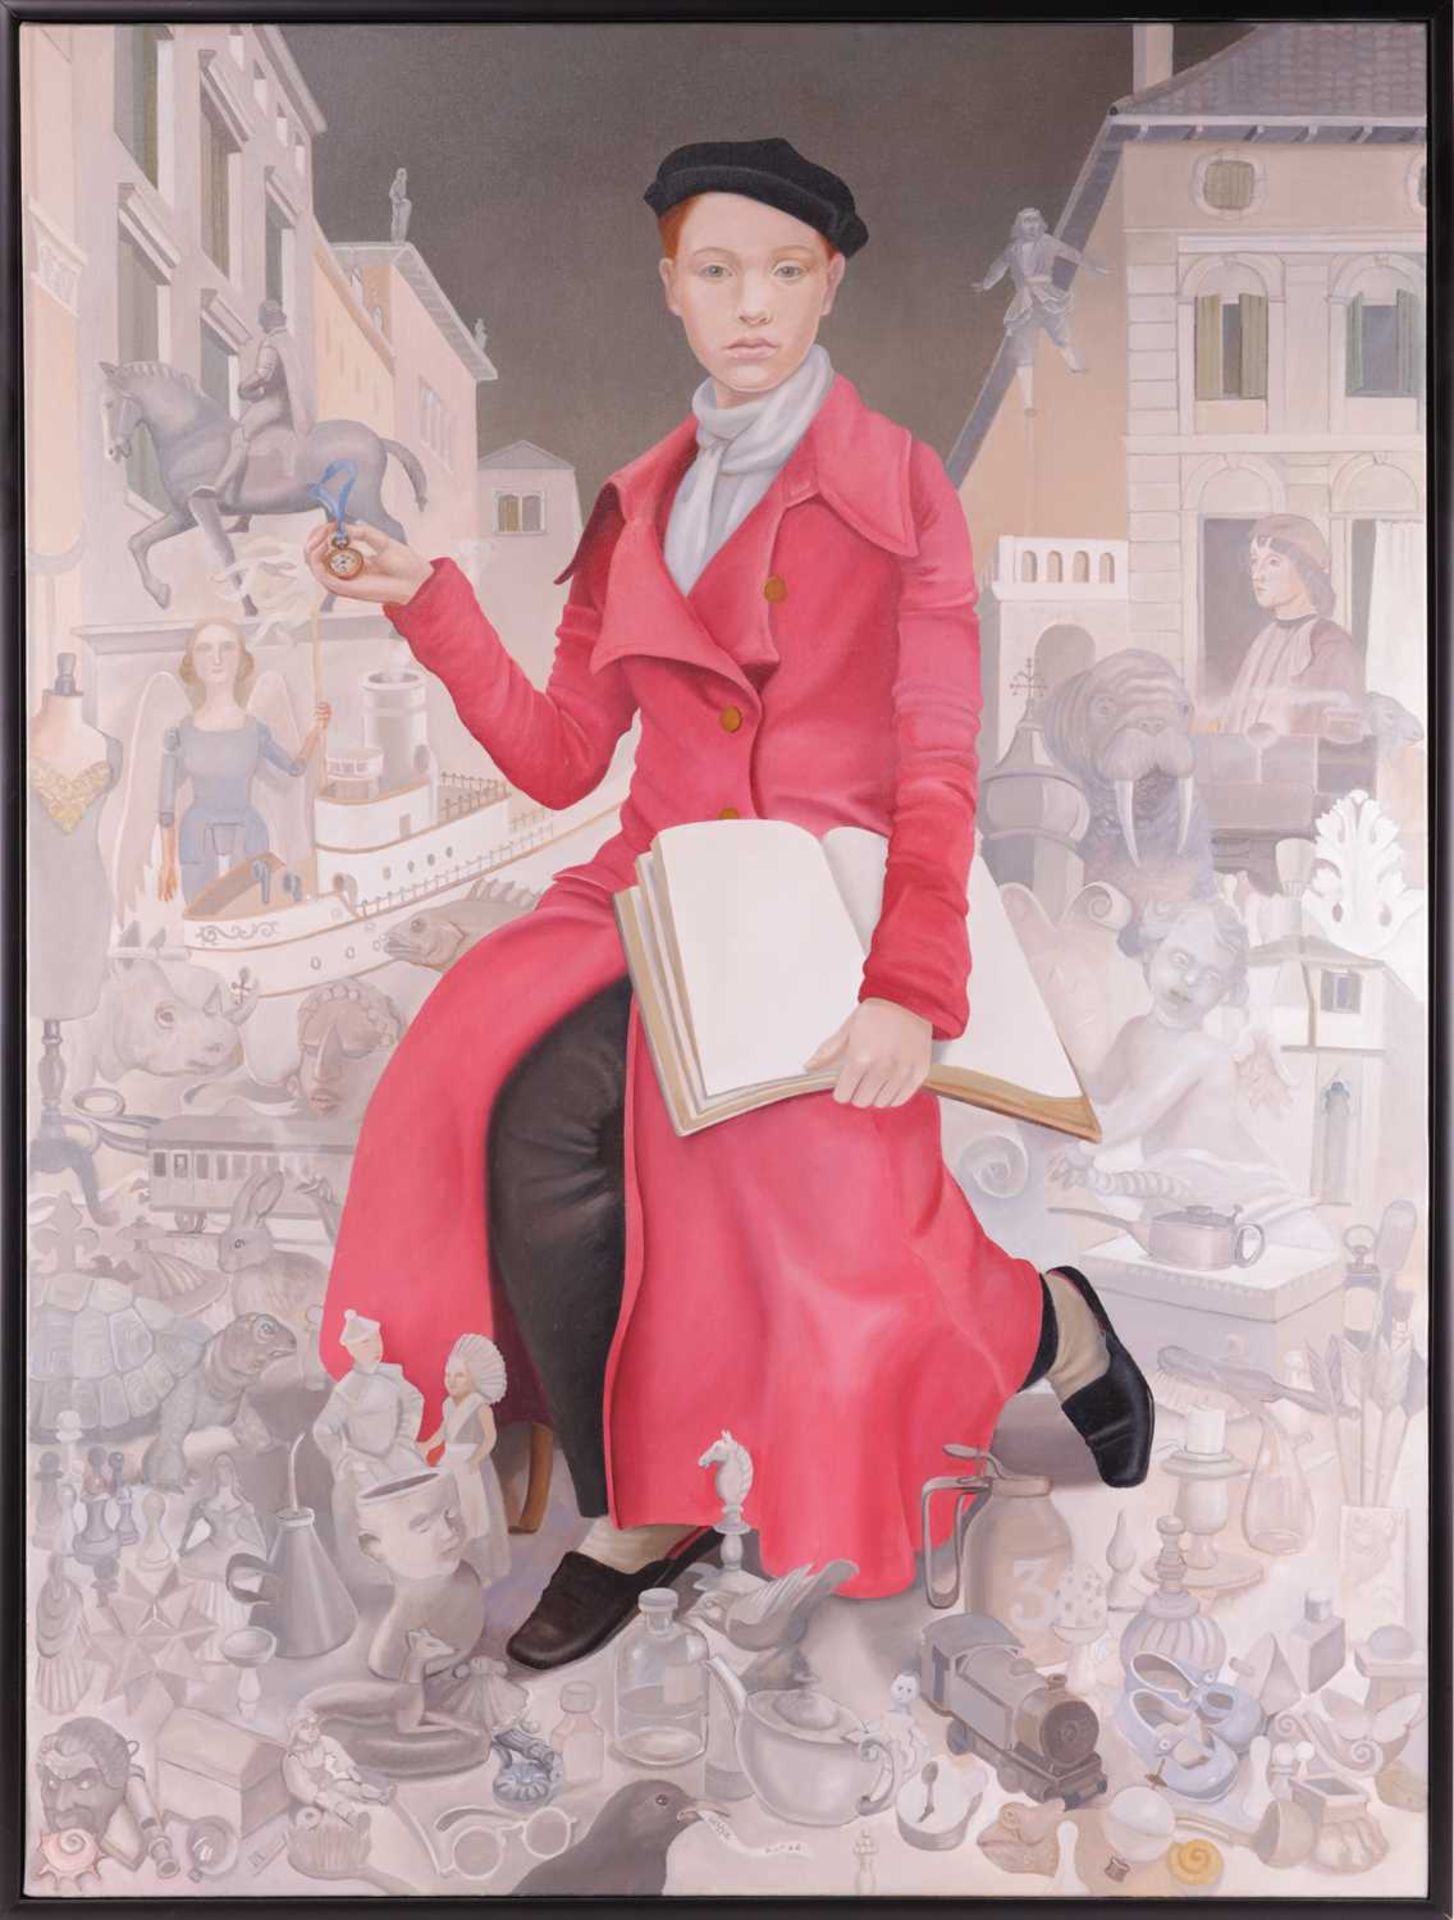 Lizzie Riches (b. 1950), 'Heir to the City' (2010/11), signed 'Lizzie Riches' (lower centre), labell - Image 2 of 12